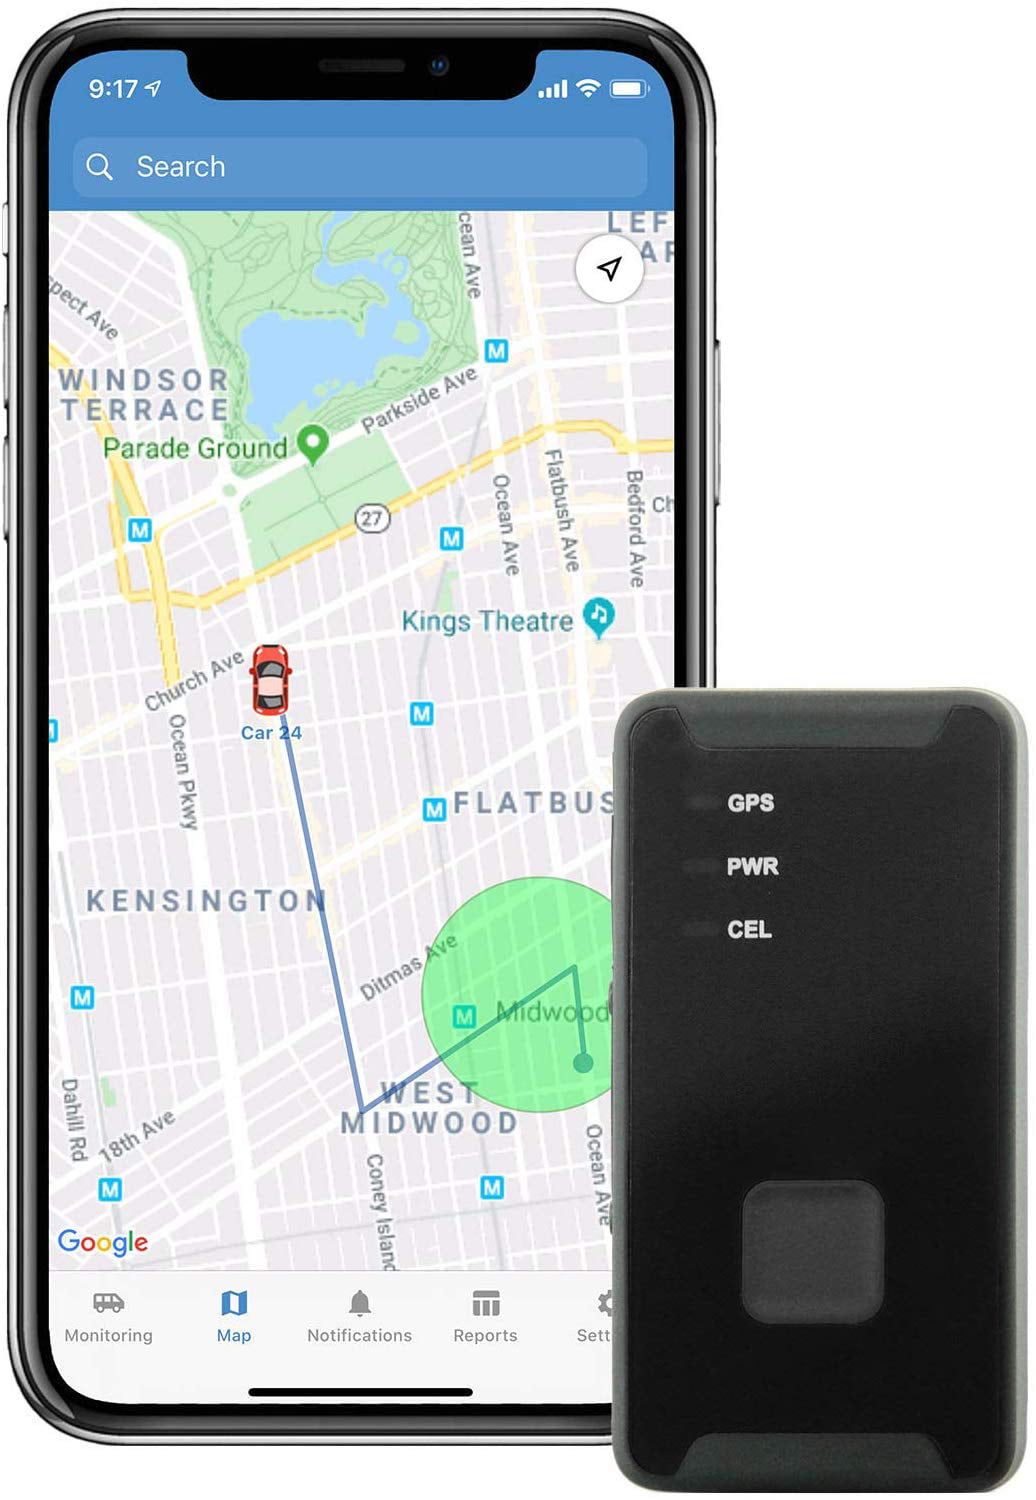 Valuables Lightning GPS Discreet 4G Cellular Micro Real-Time Portable GPS Tracker for Vehicles Kids Teens Equipment Elderly Cars 